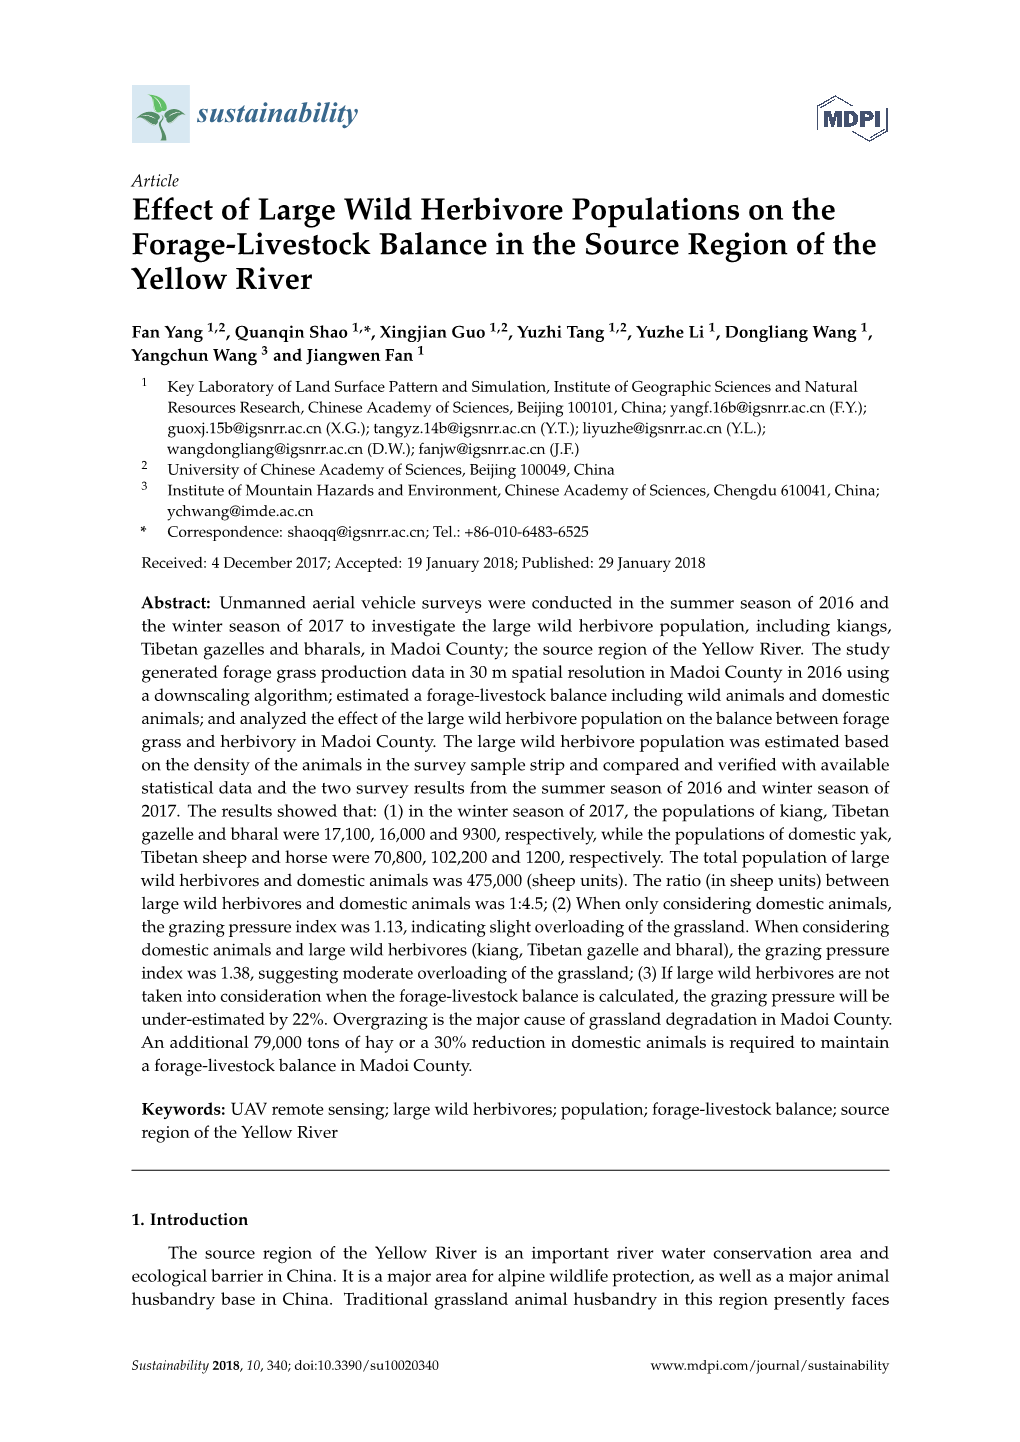 Effect of Large Wild Herbivore Populations on the Forage-Livestock Balance in the Source Region of the Yellow River